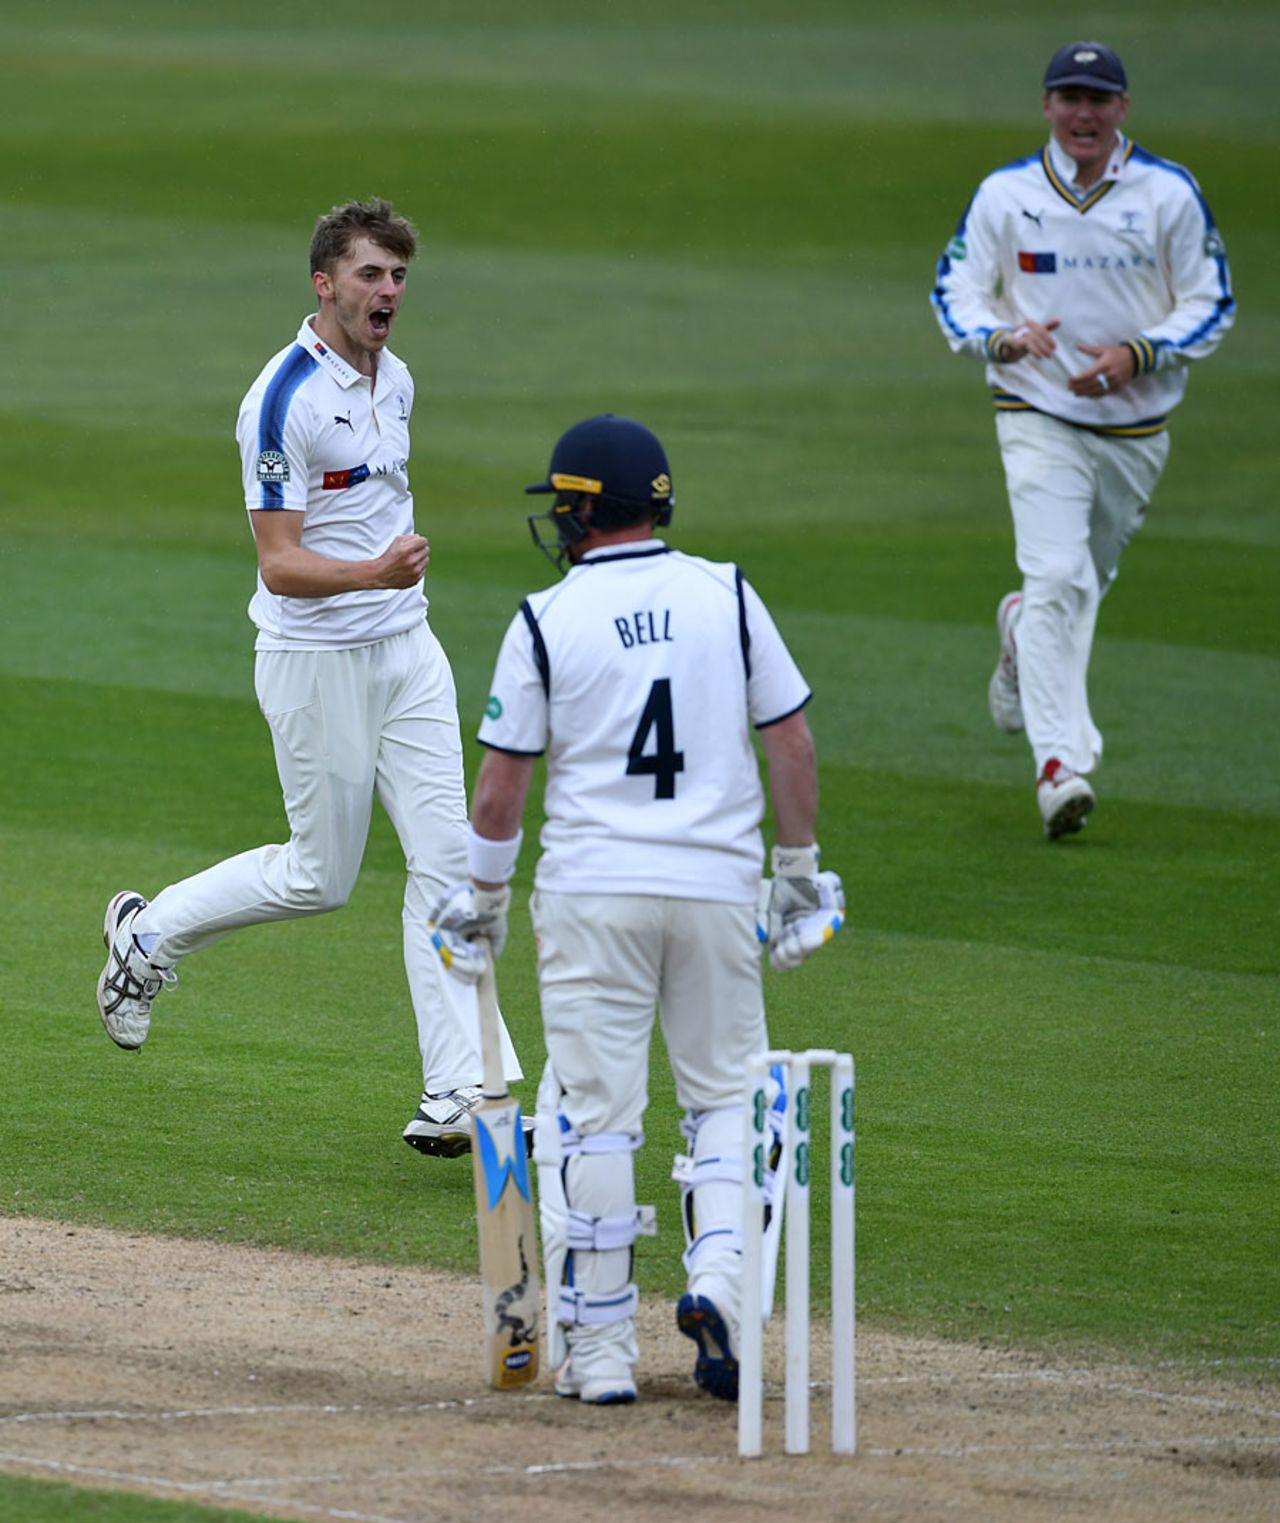 Ben Coad removed Ian Bell for 1 moments before the players left the field, Warwickshire v Yorkshire, County Championship, Division One, Edgbaston, 3rd day, April 16, 2017